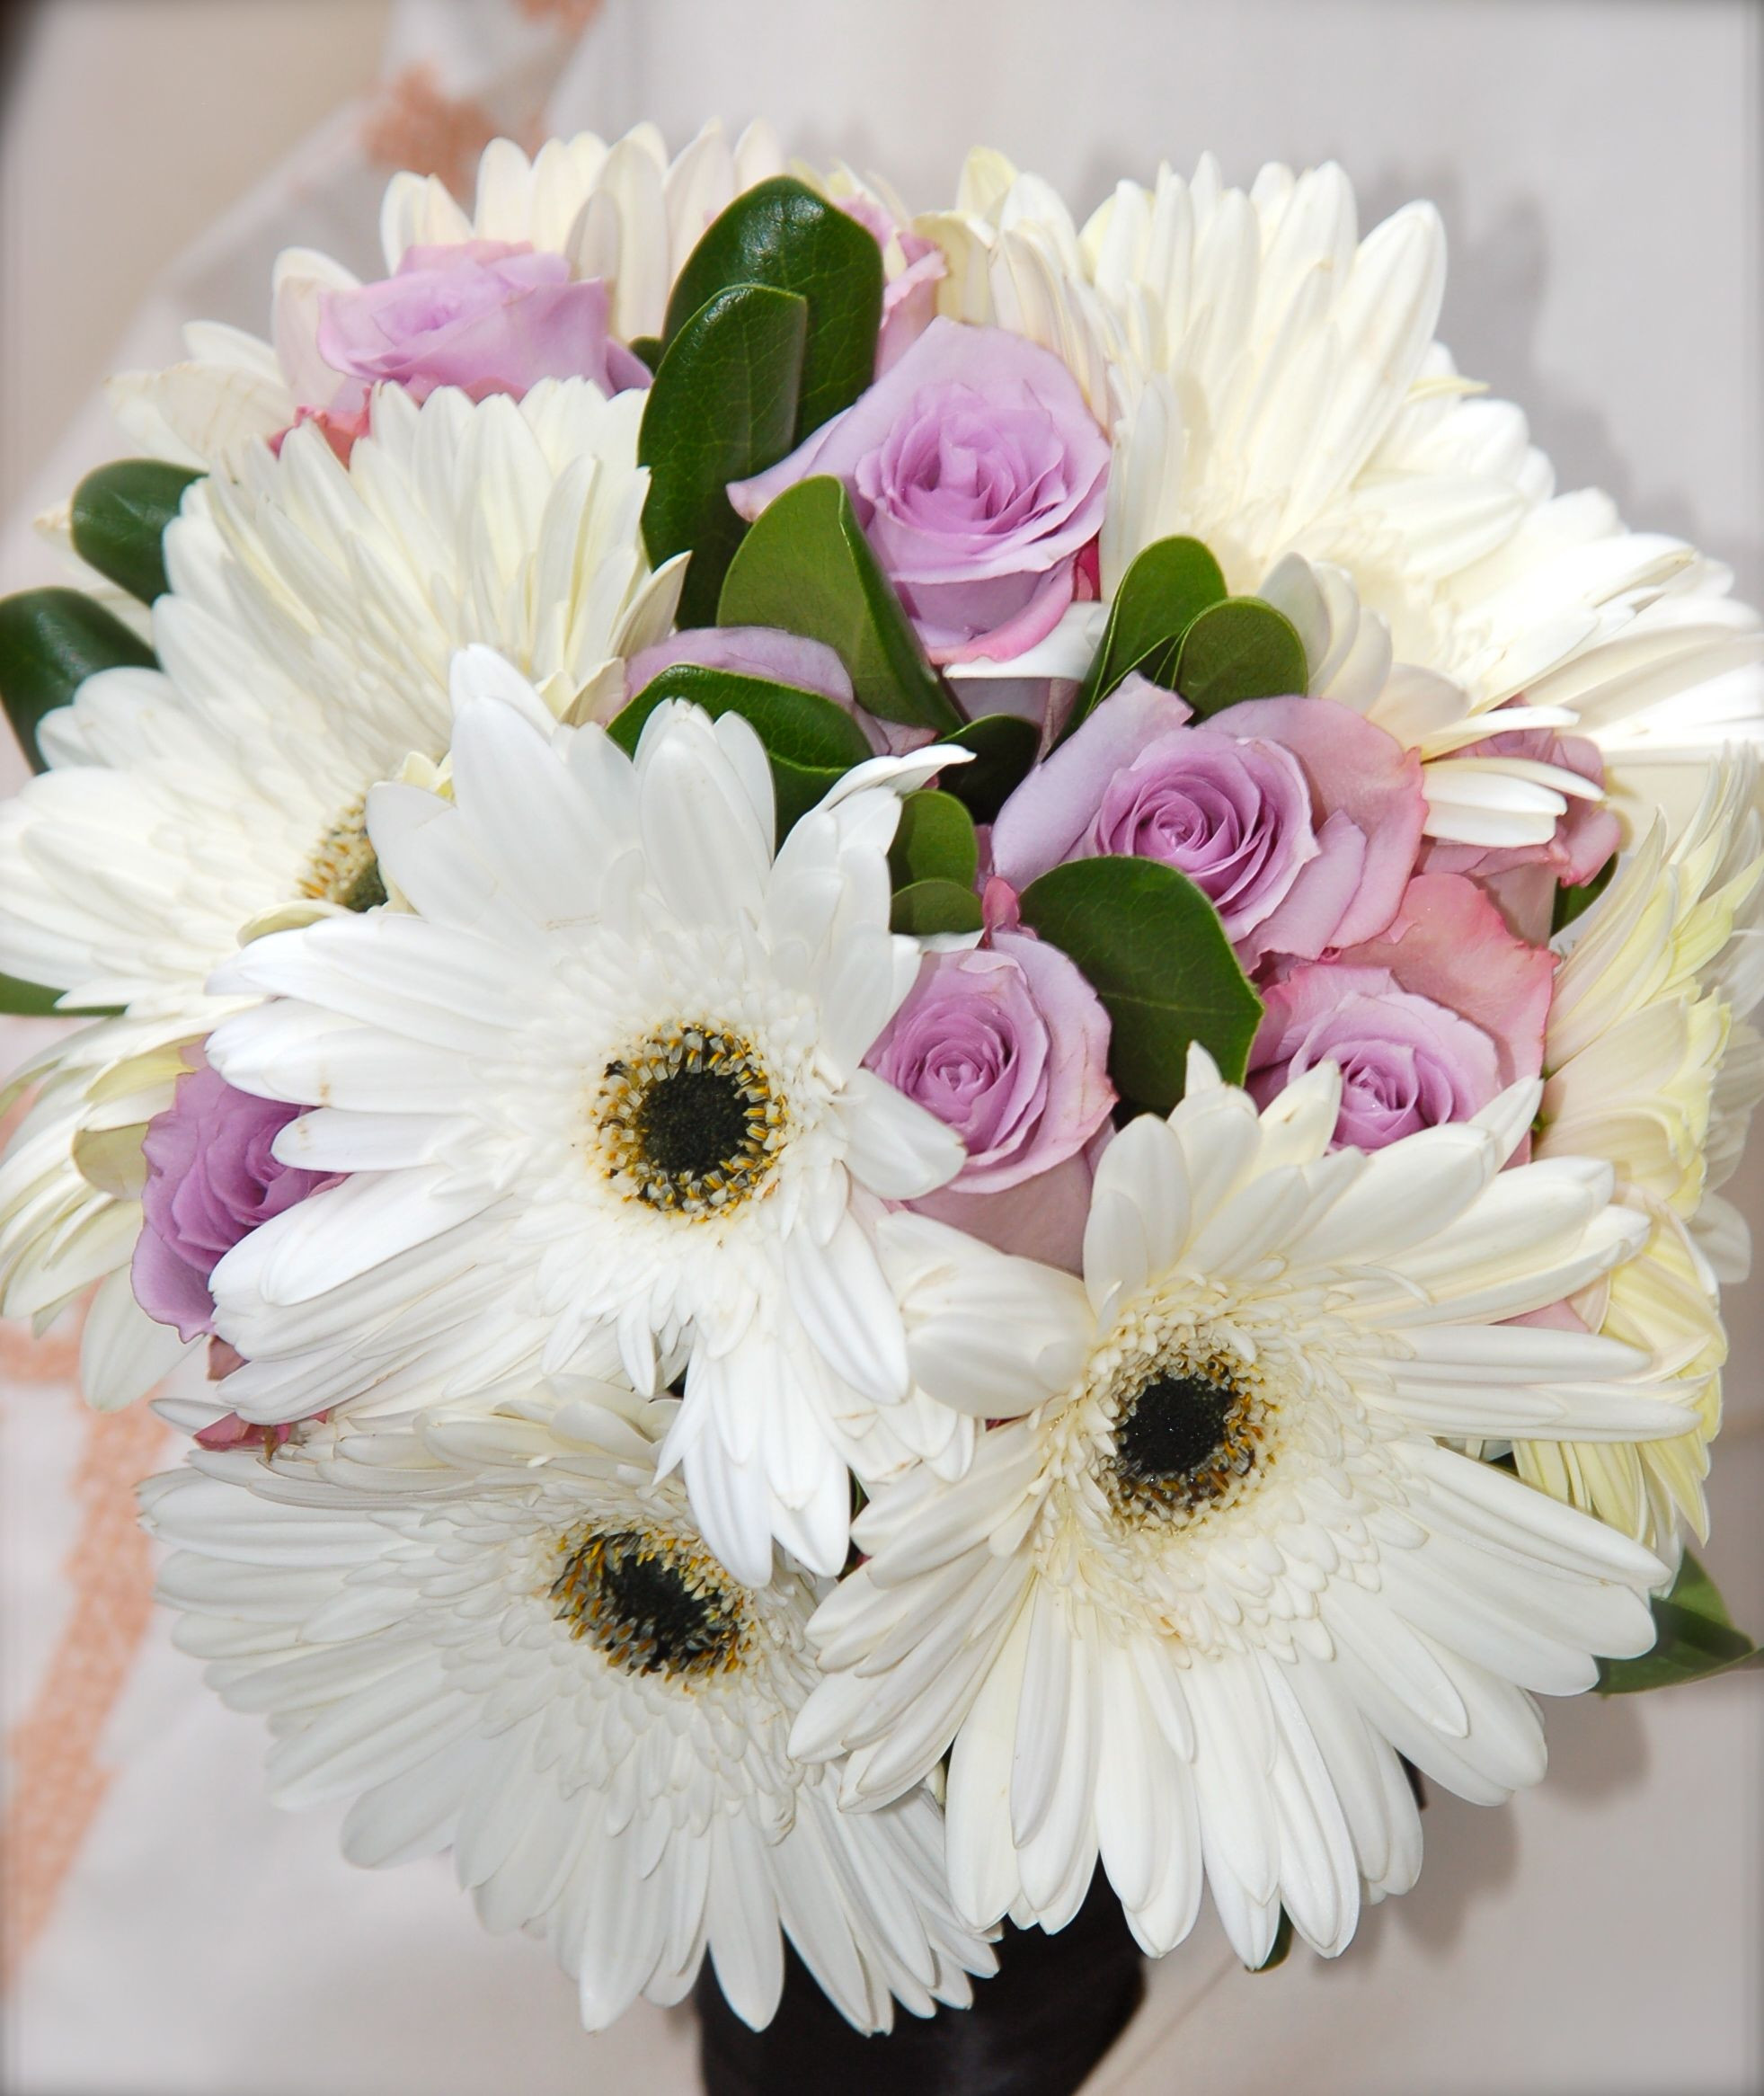 19 Amazing Gerbera Daisy In Vase 2024 free download gerbera daisy in vase of gerbera daisies lavender roses white pinterest lavender intended for gerbera daisies